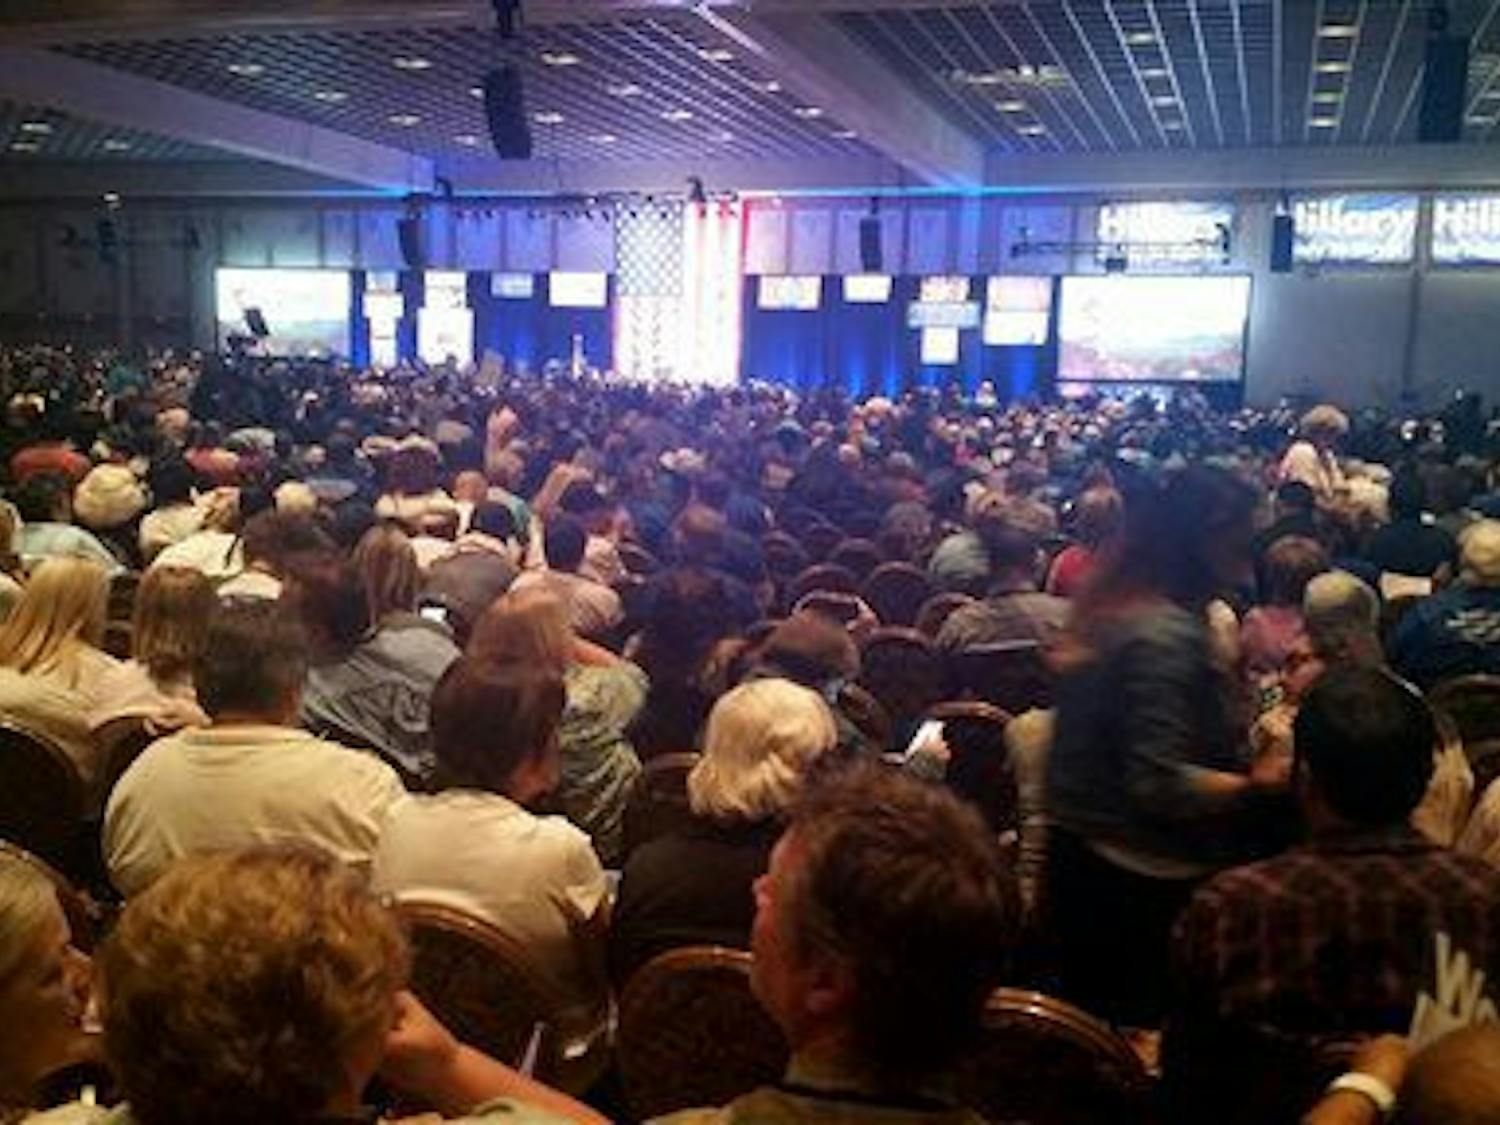 Thousands of people gather at the Paris casino in Las Vegas for the Nevada State Democratic Convention on Saturday, May 14, 2016. They are picking delegates to send to the national convention in July. (AP Photo/Michelle Rindels)